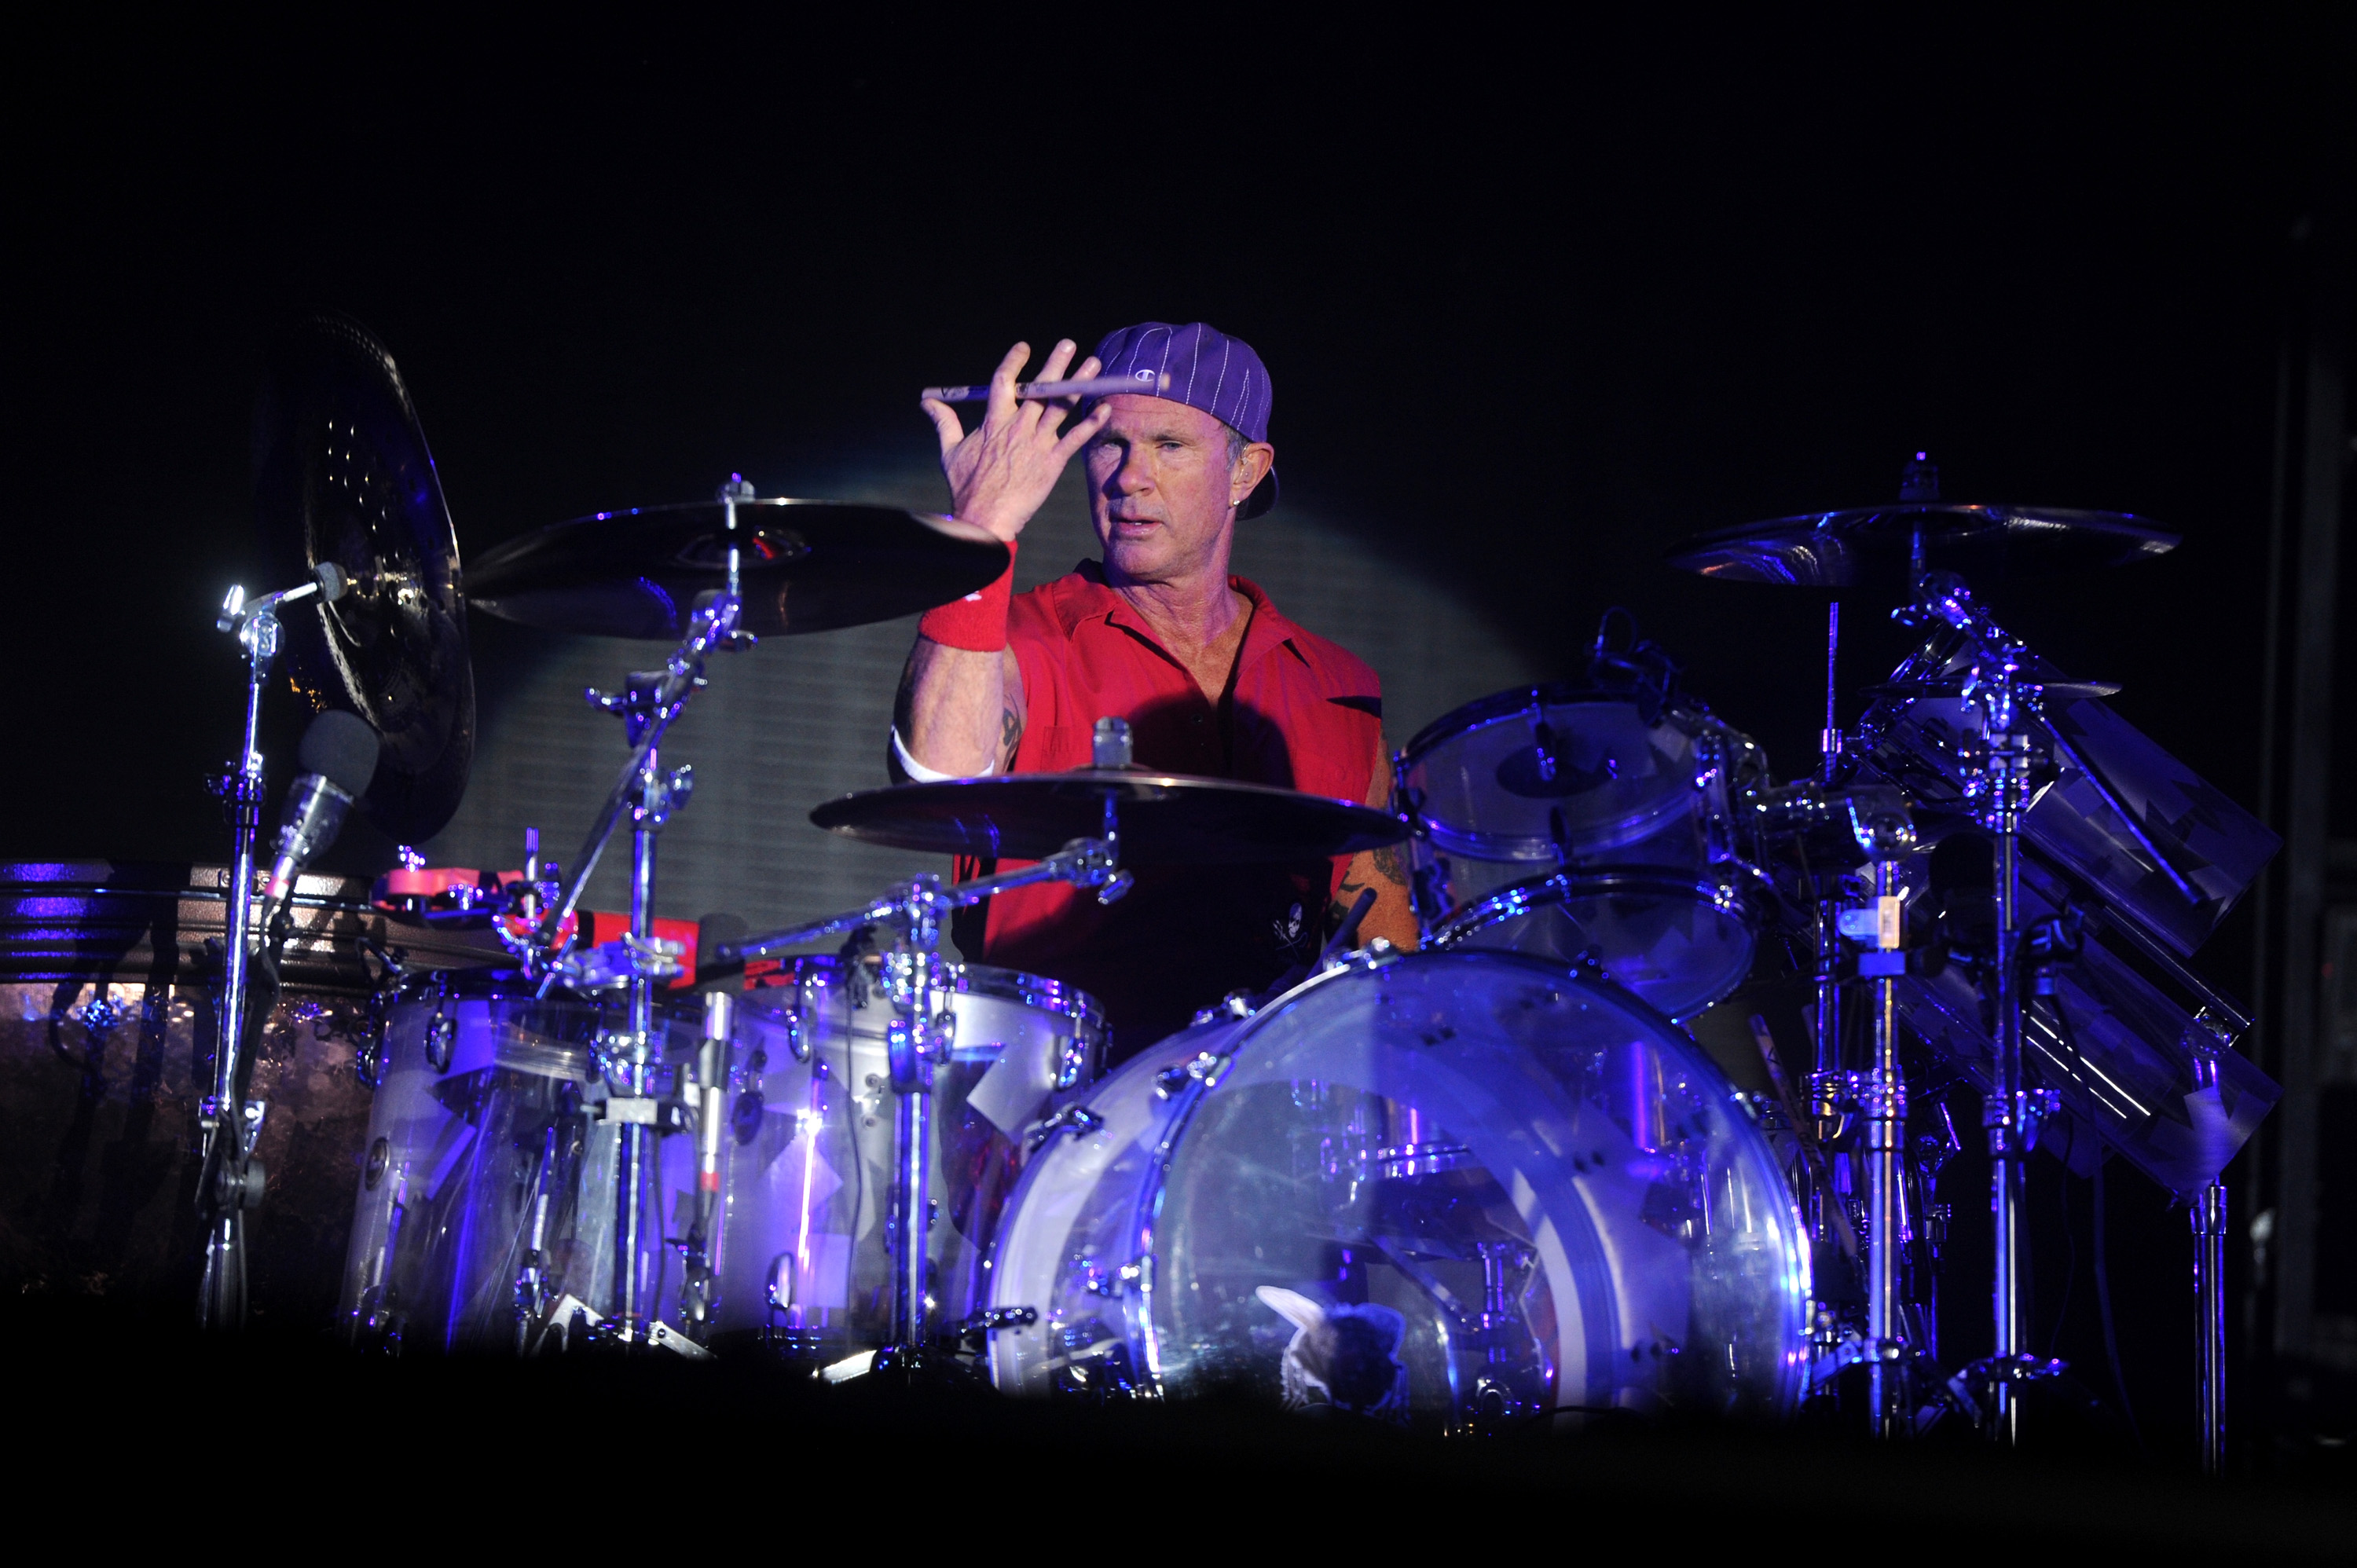 20. Chad Smith (Red Hot Chili Peppers)